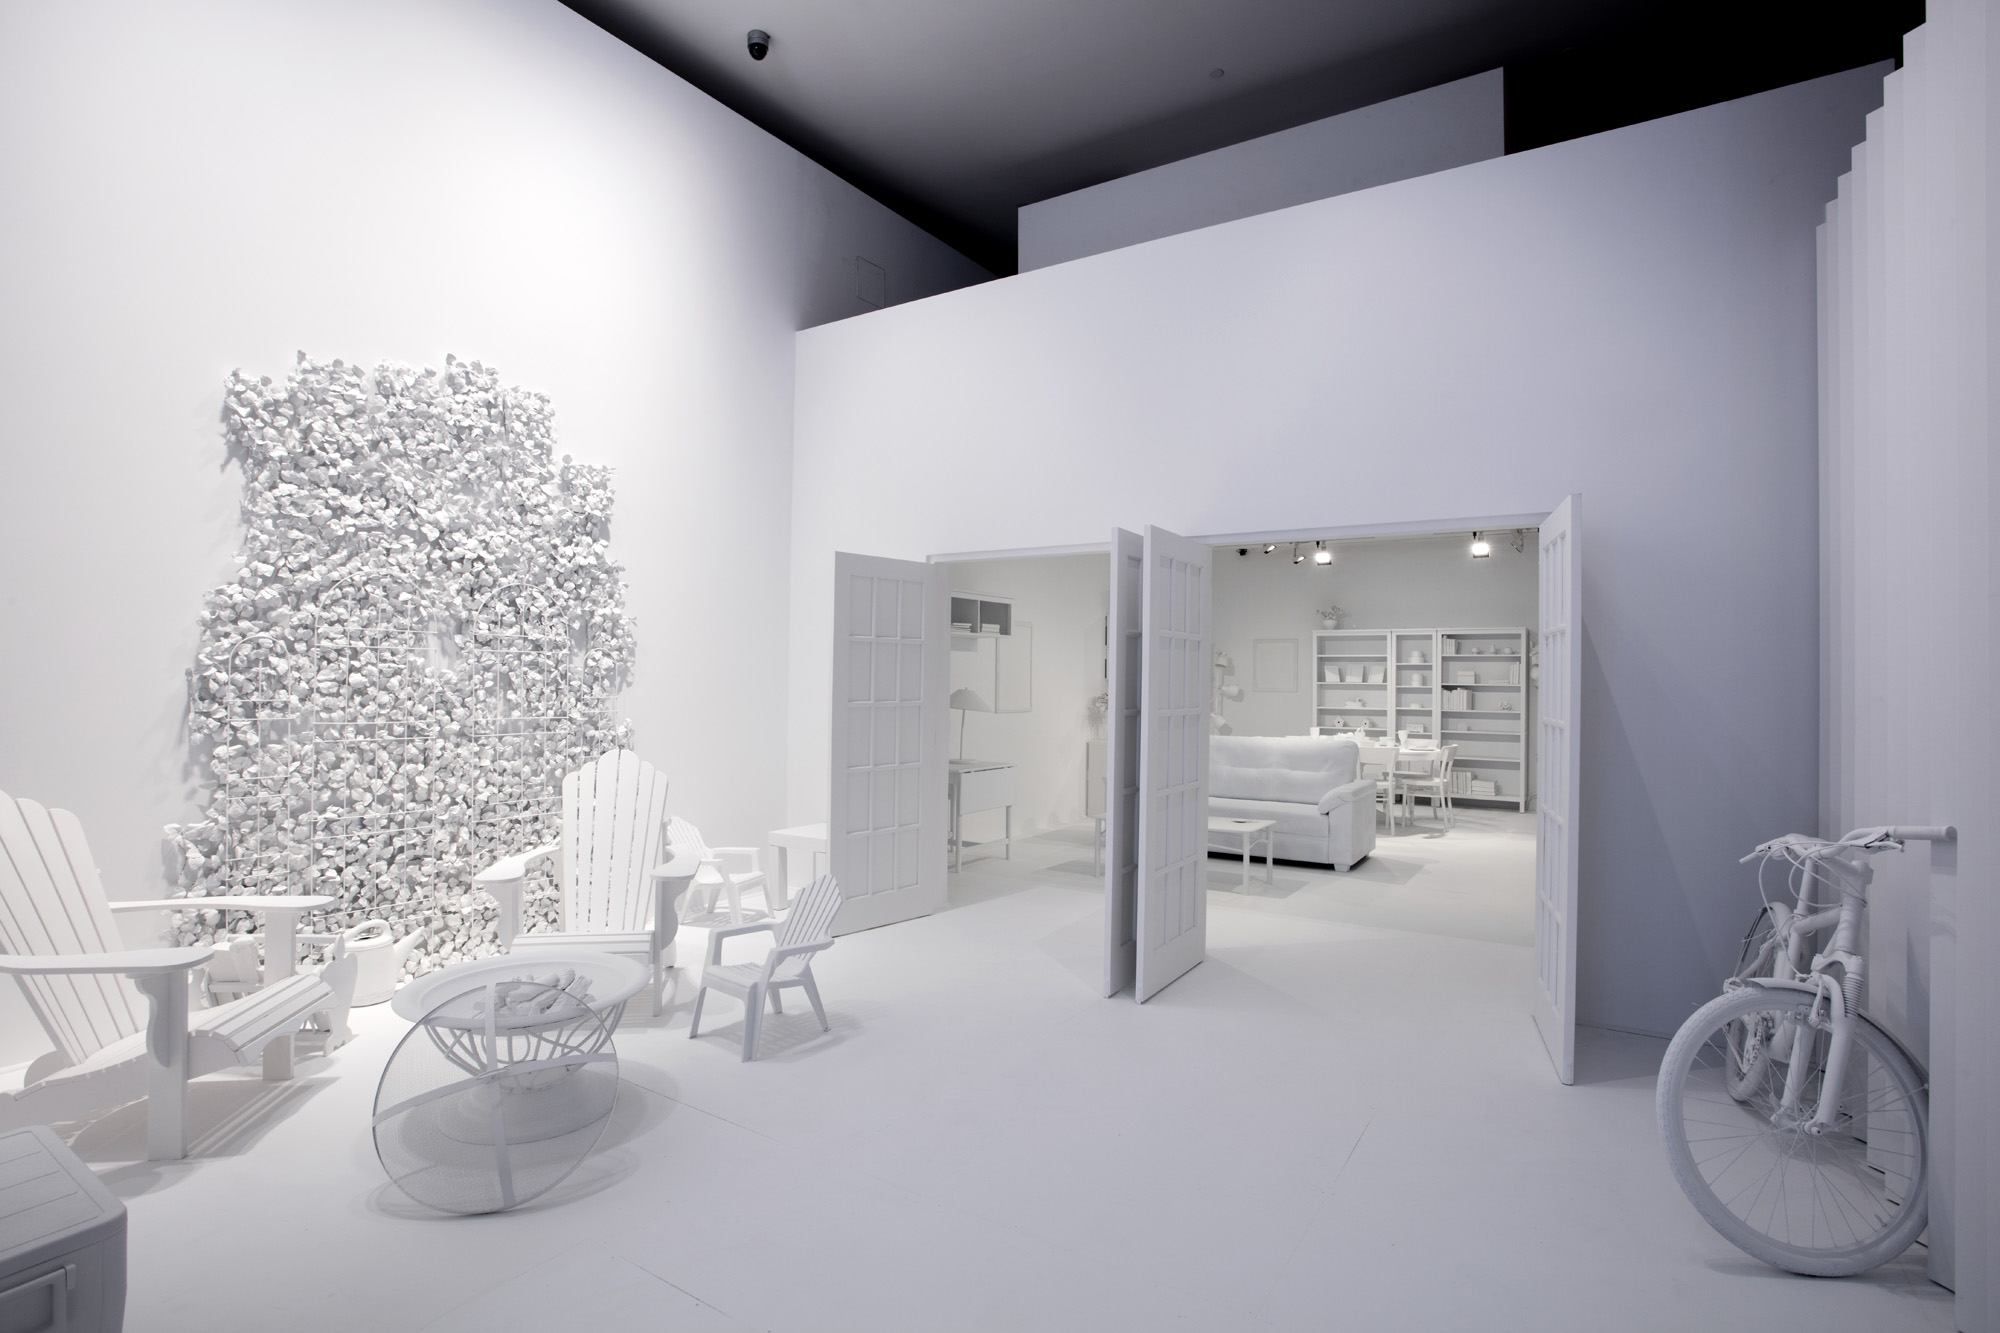 The AGO's all white The Obliteration Room